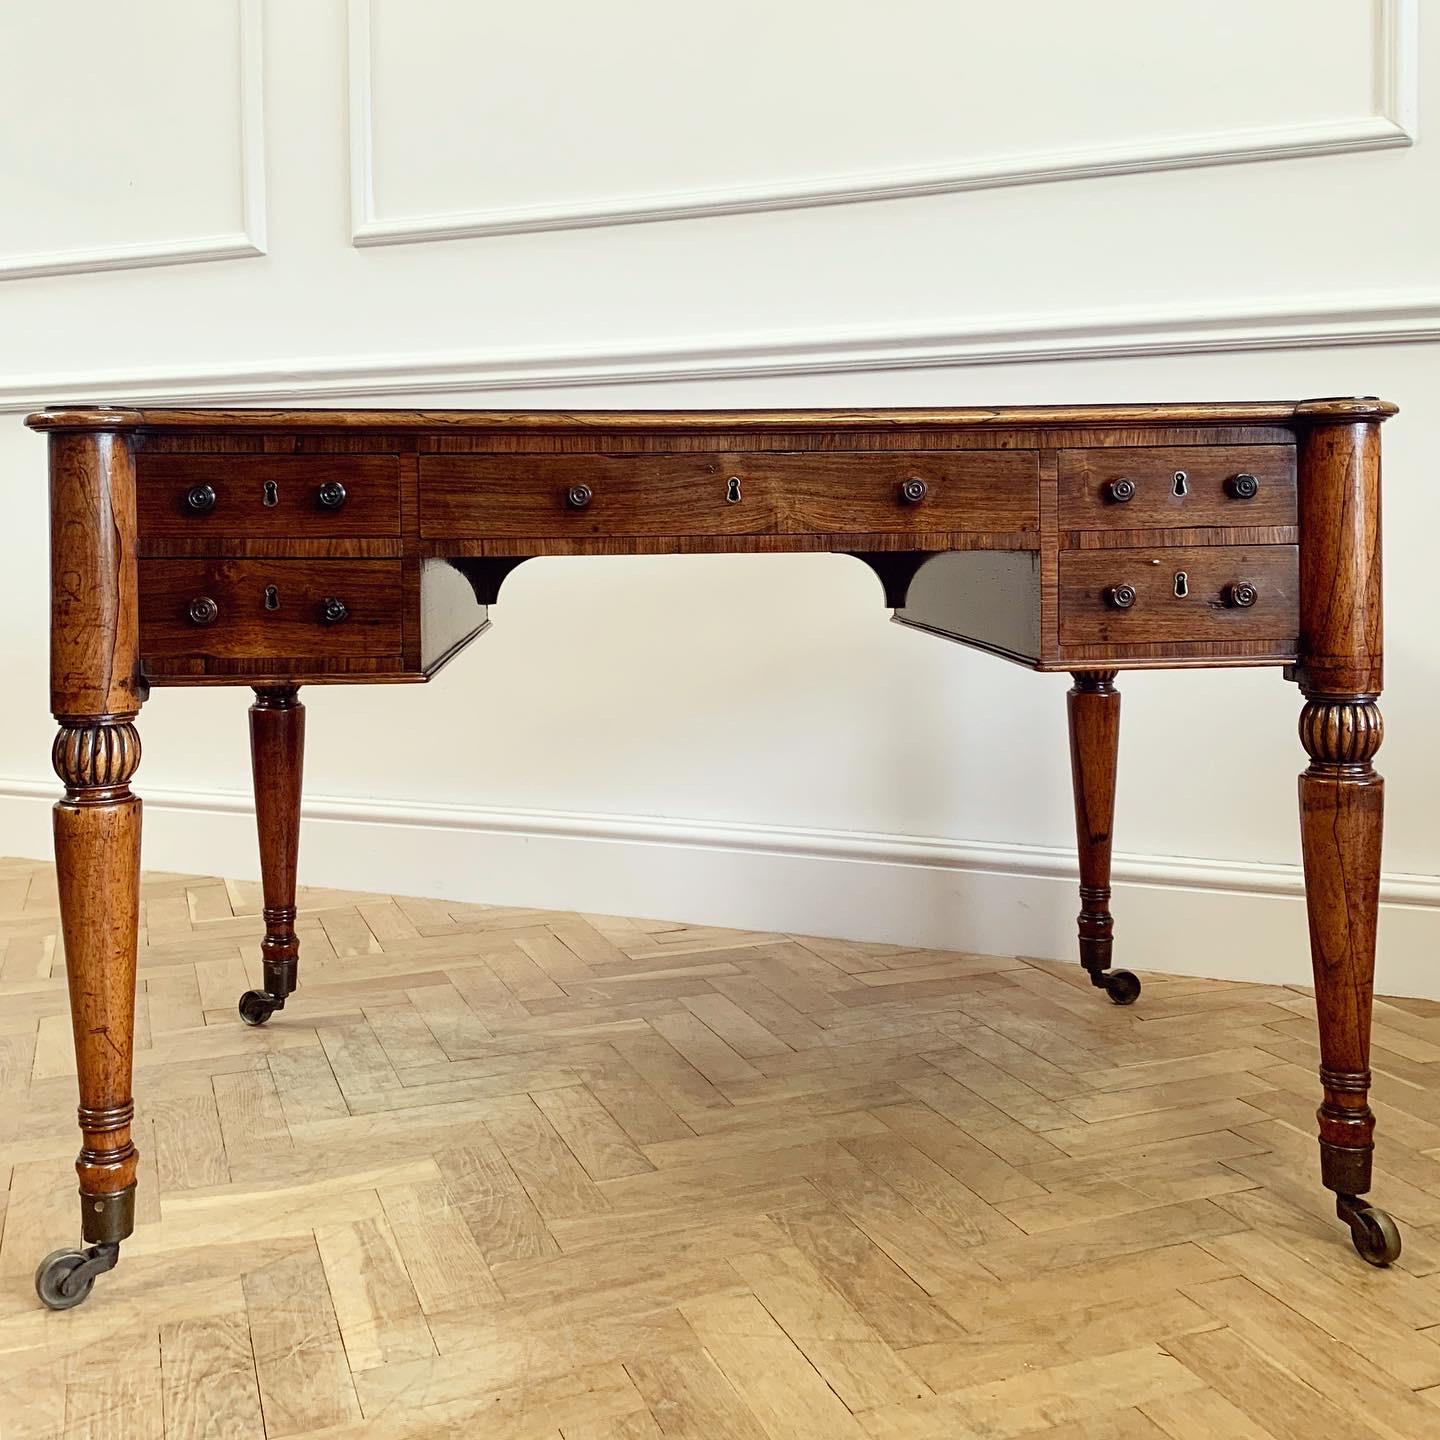 A fine George IV coromandel free standing desk with inset teal leather skiver decorated with gilt Greek key border, supported by four four solid coromandel turned legs of exceptional graining terminating in best quality brass castors - faux drawers